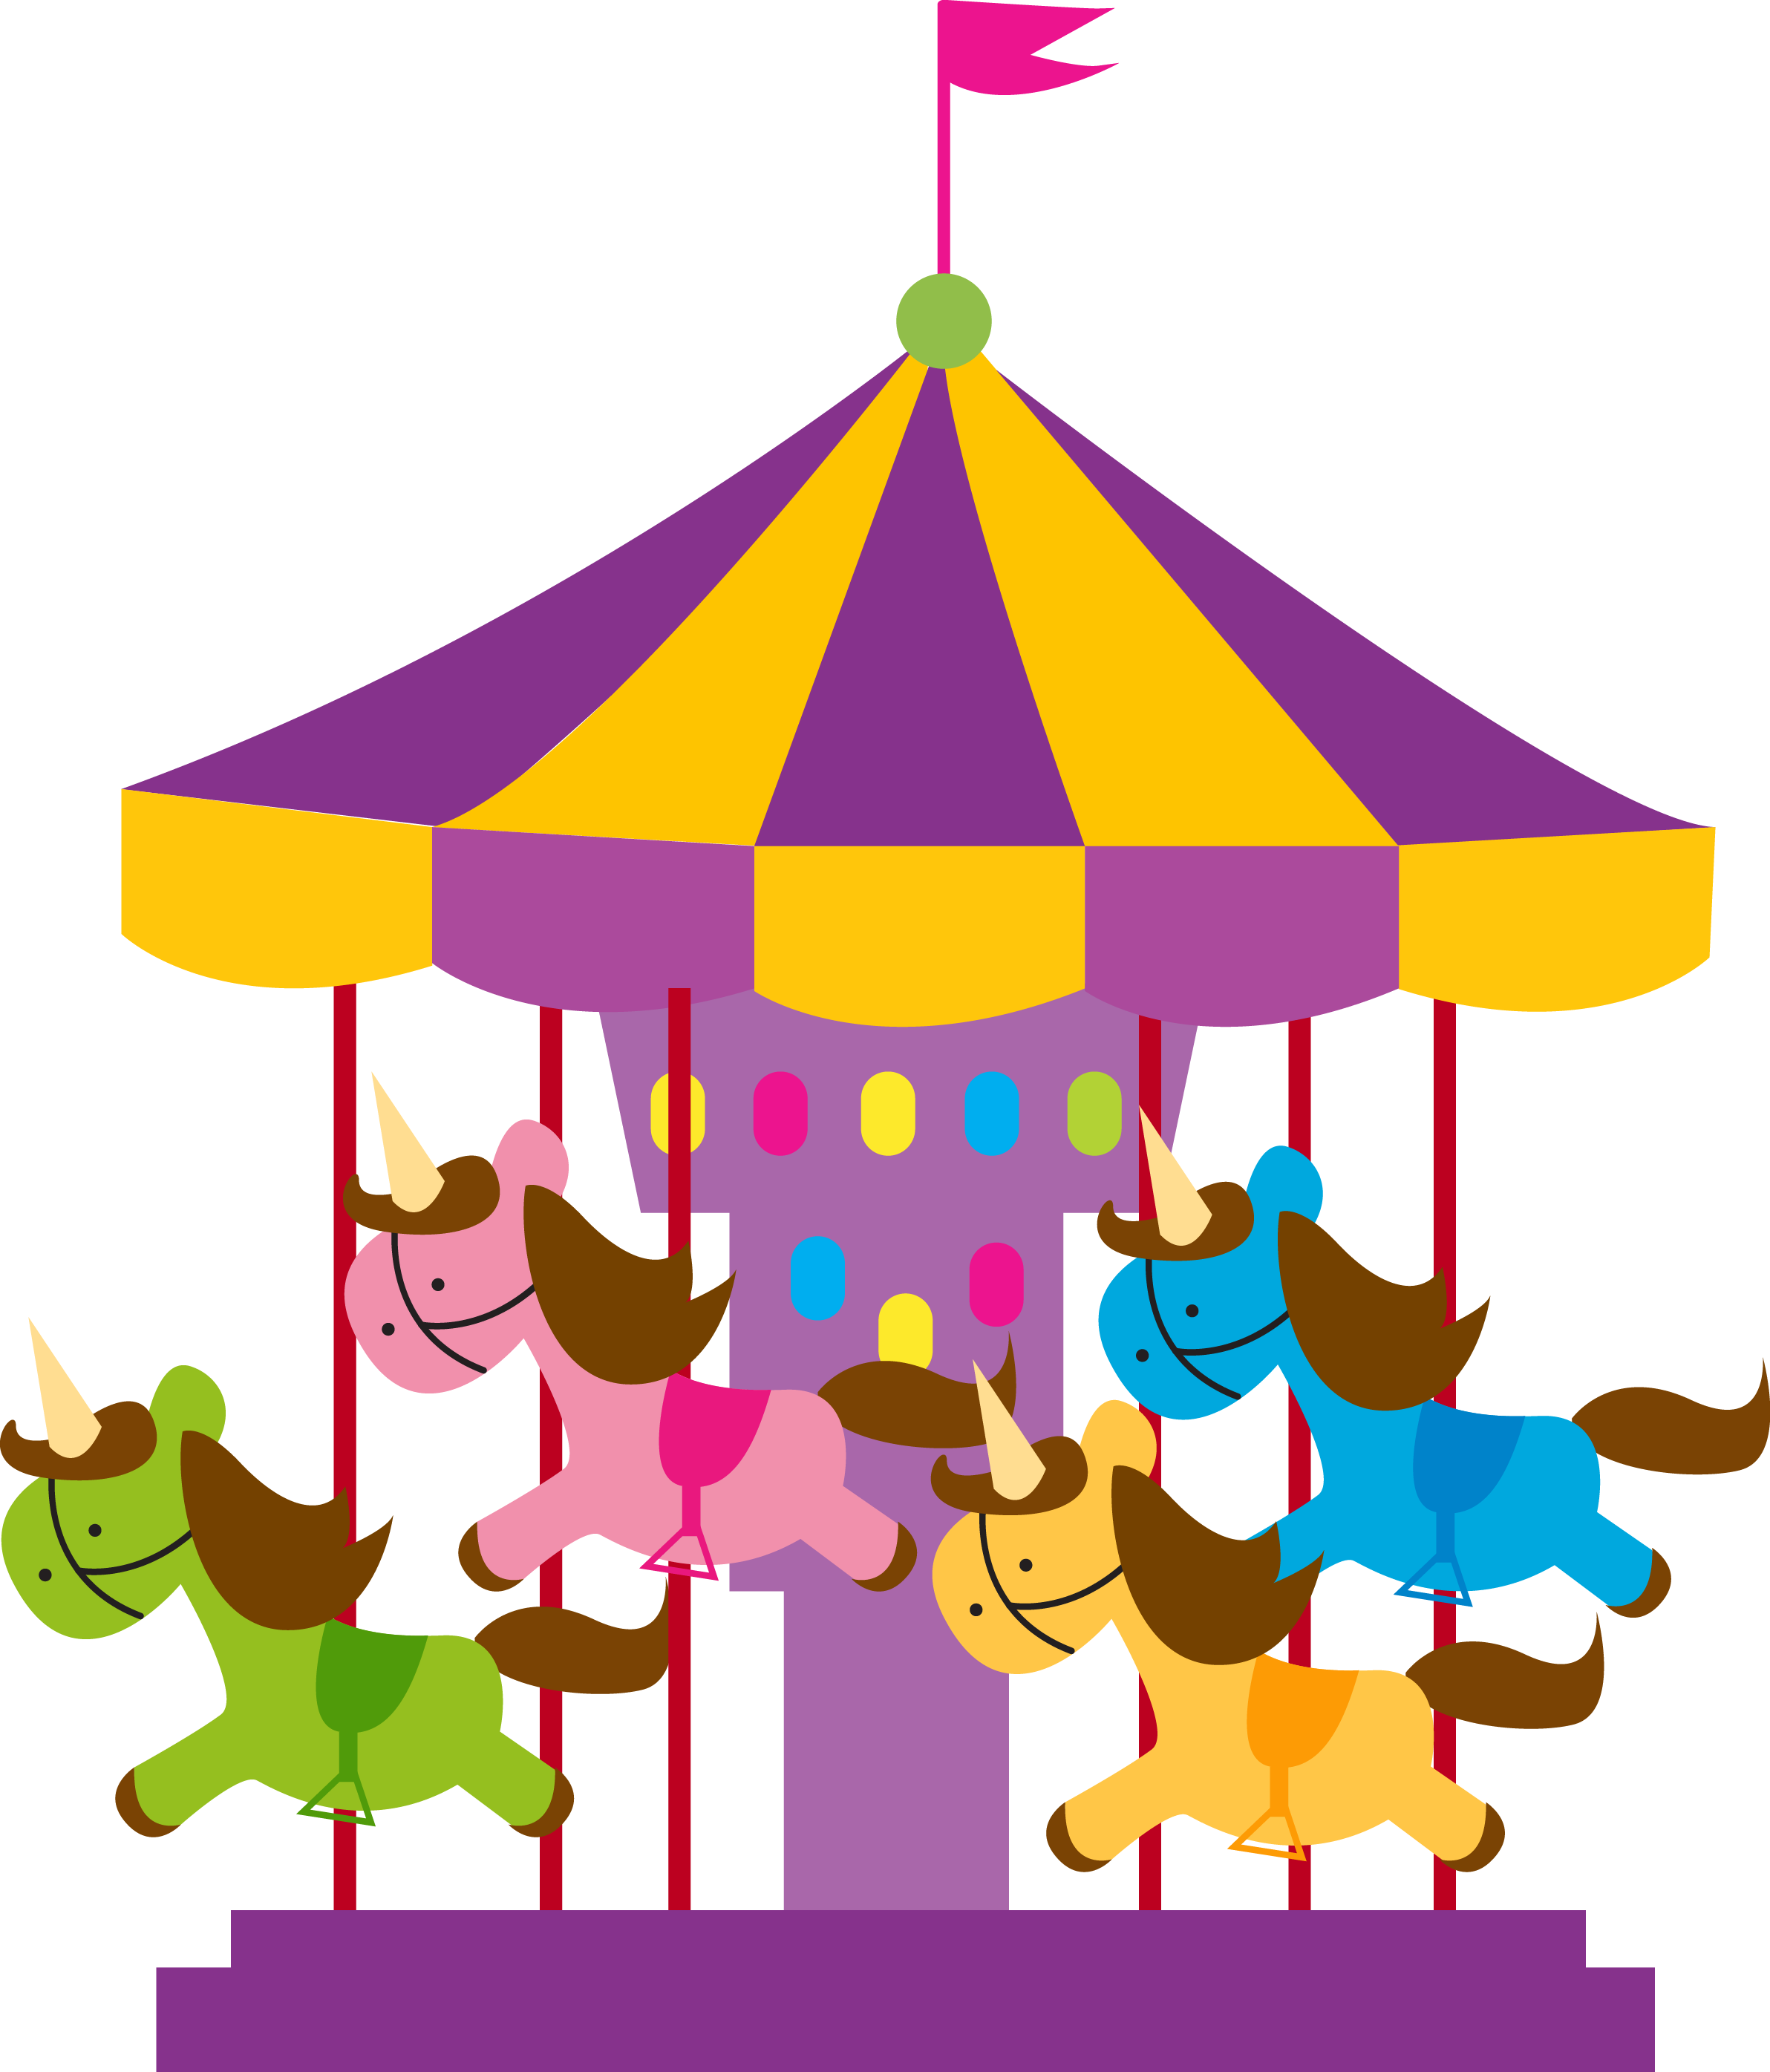 rollercoaster clipart carnival